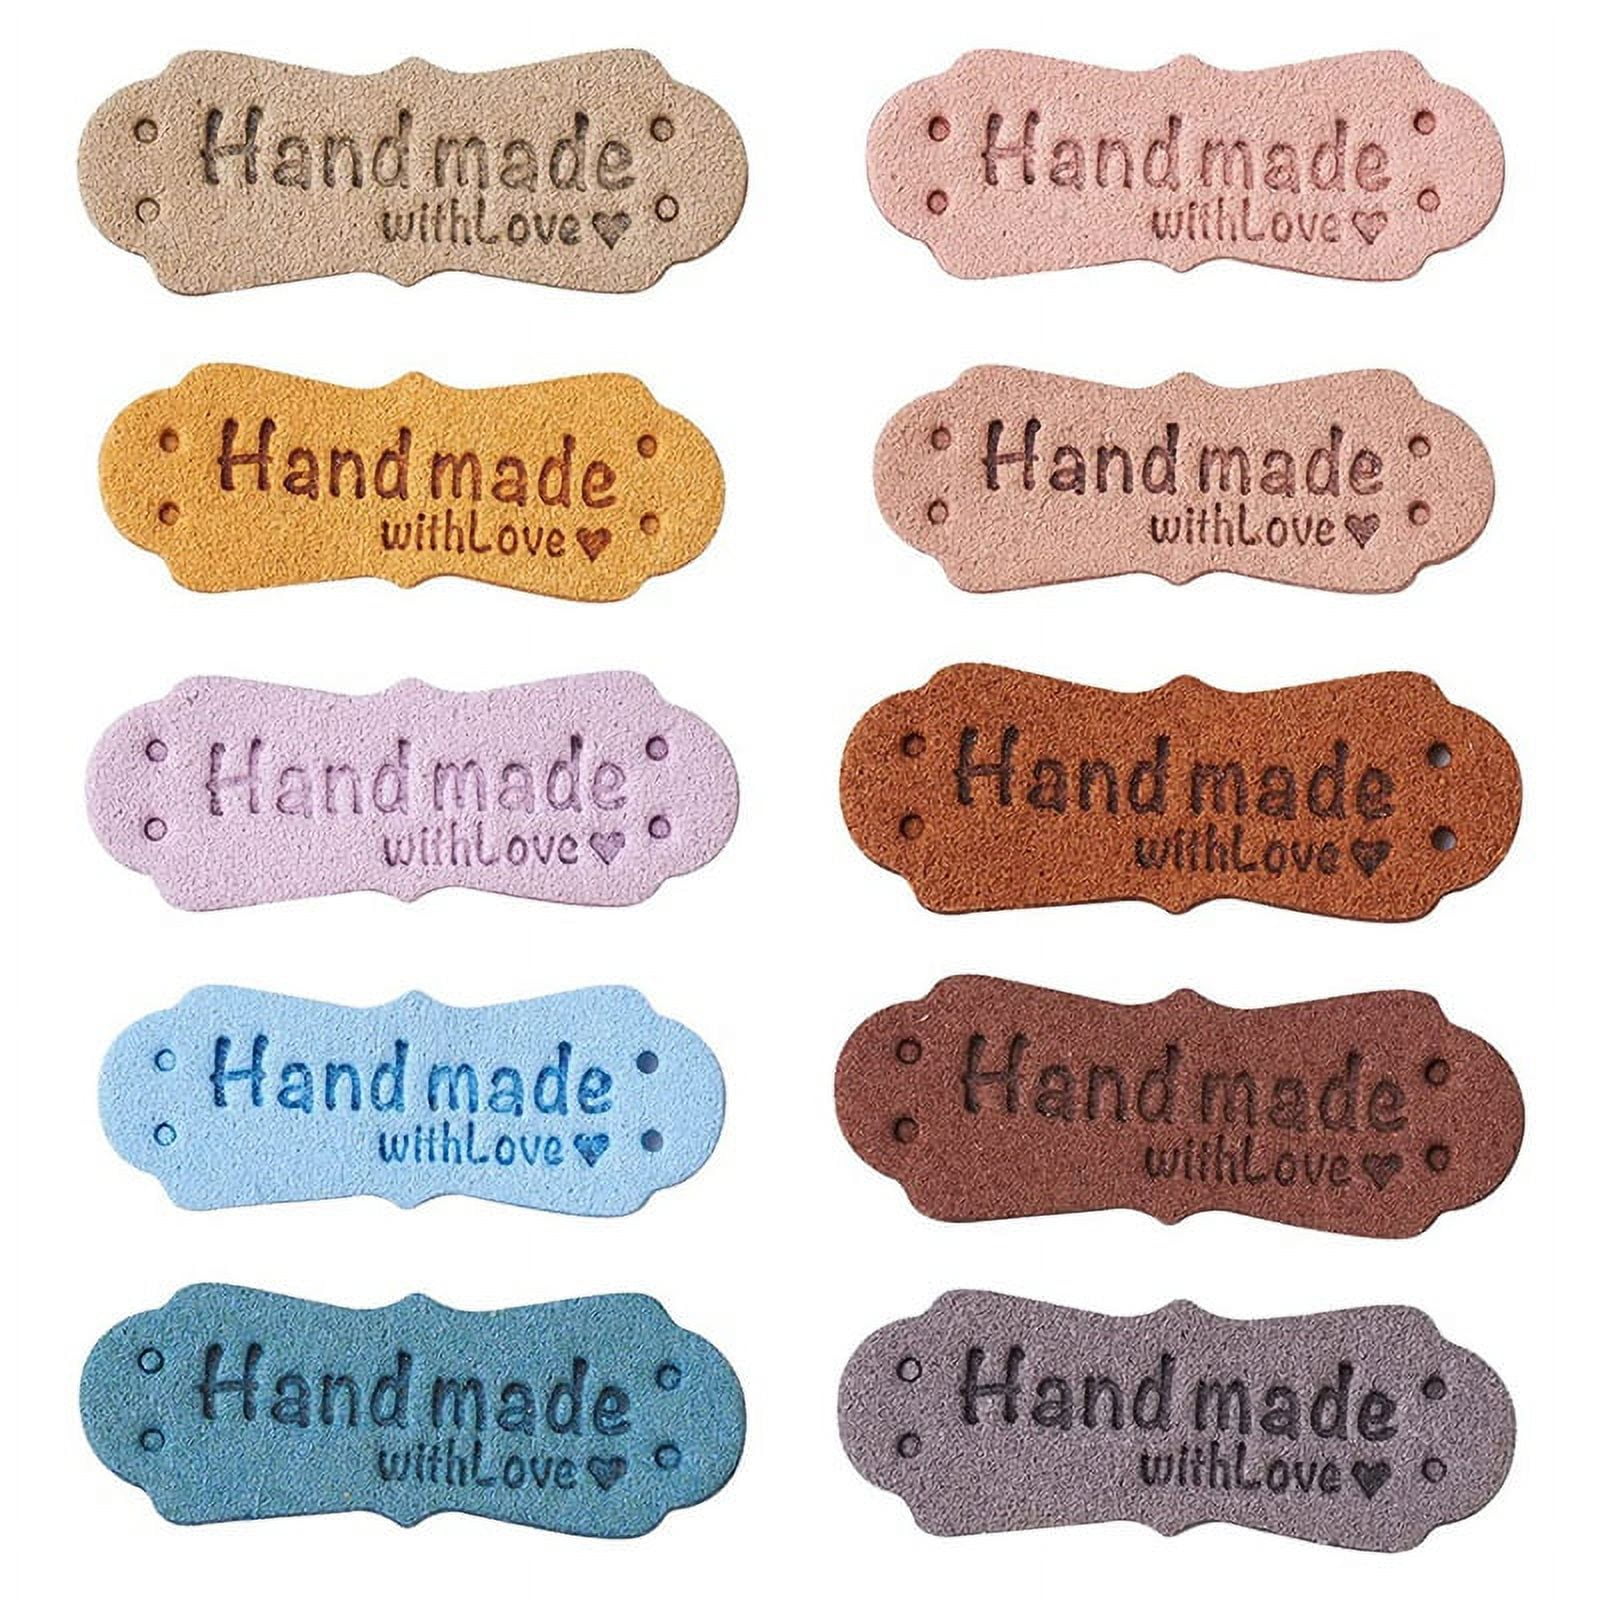 20pcs Handmade Labels Clothing Hand Made Embossed Tag PU Leather Tags  Labels with Holes,Handmade Tag DIY Hats Bags Sewing Tags(08)